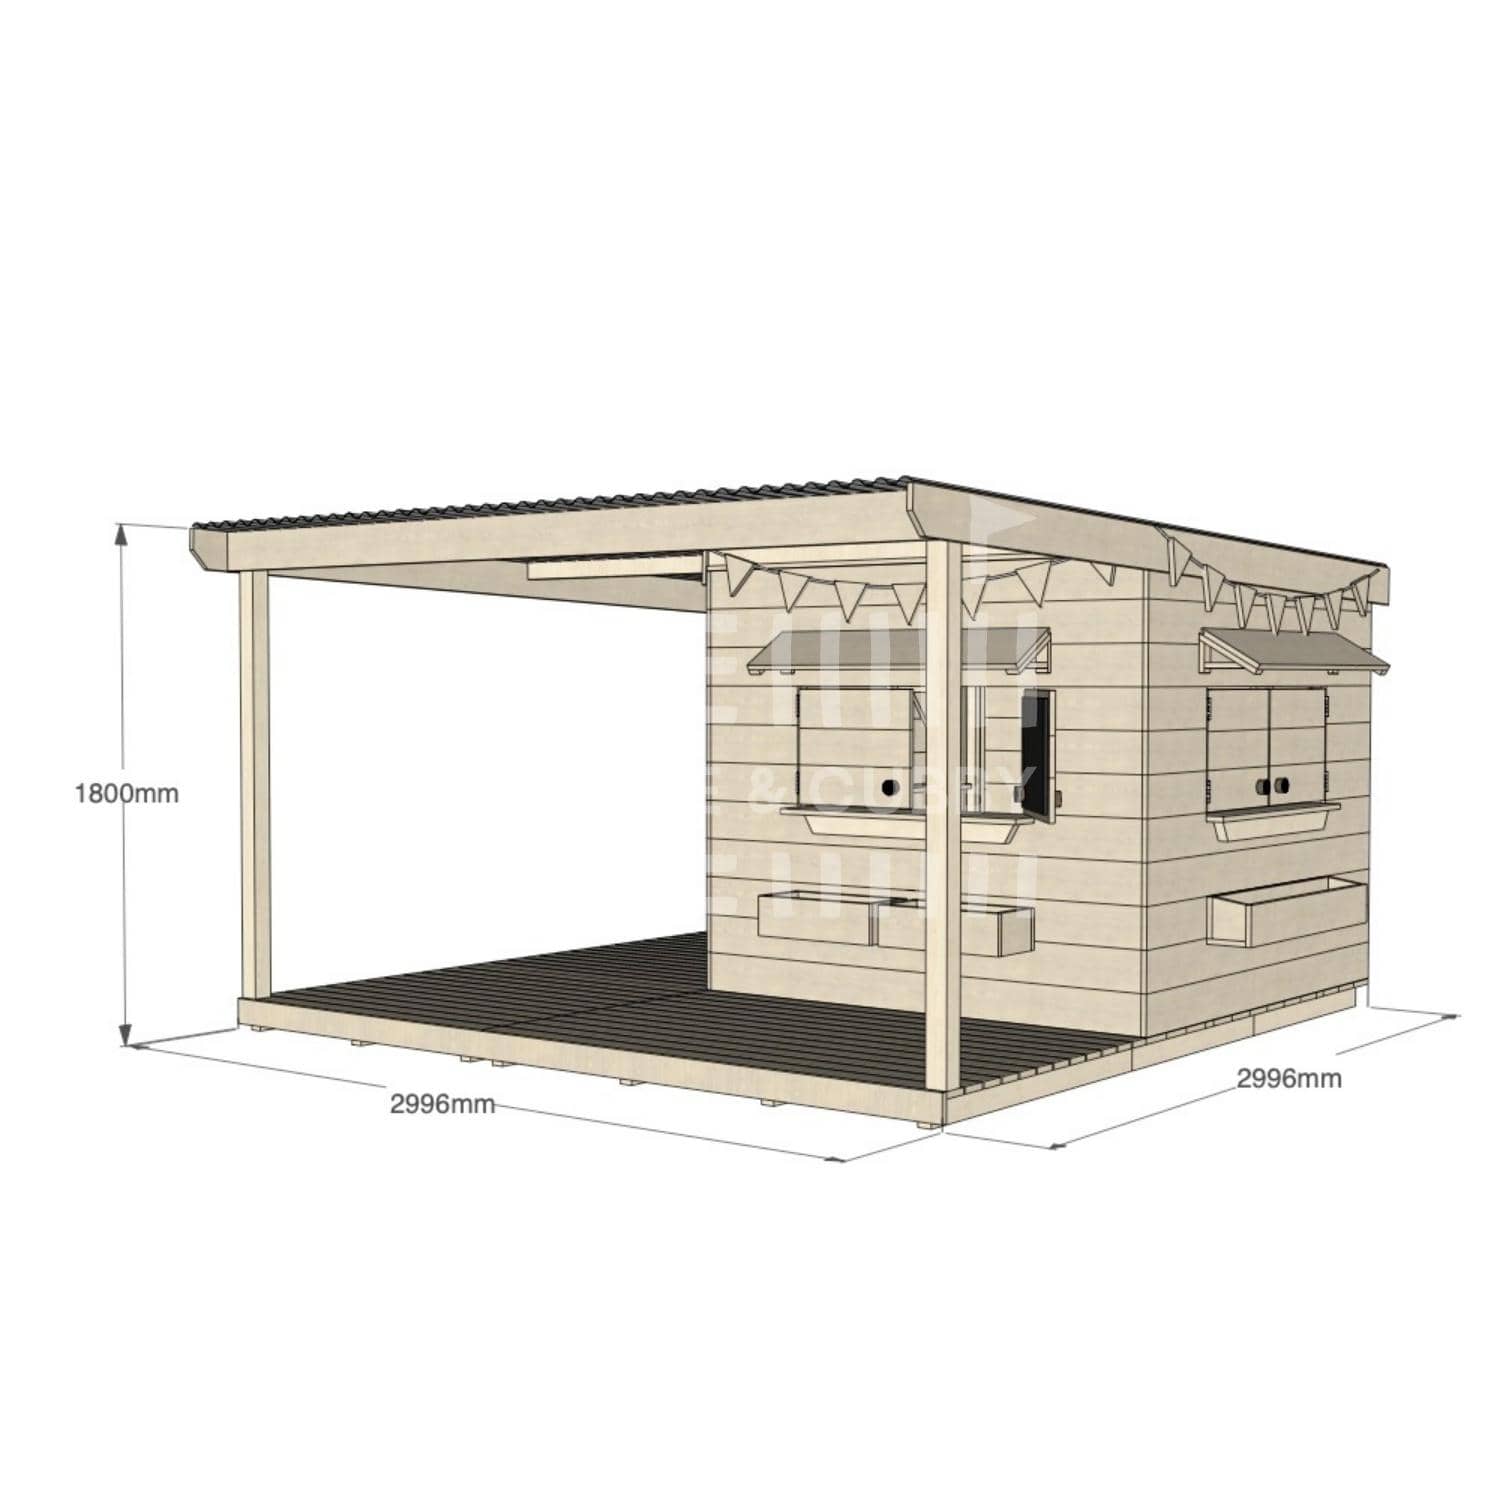 Raw pine cubby house with wraparound verandah for residential backyards midi square size with dimensions